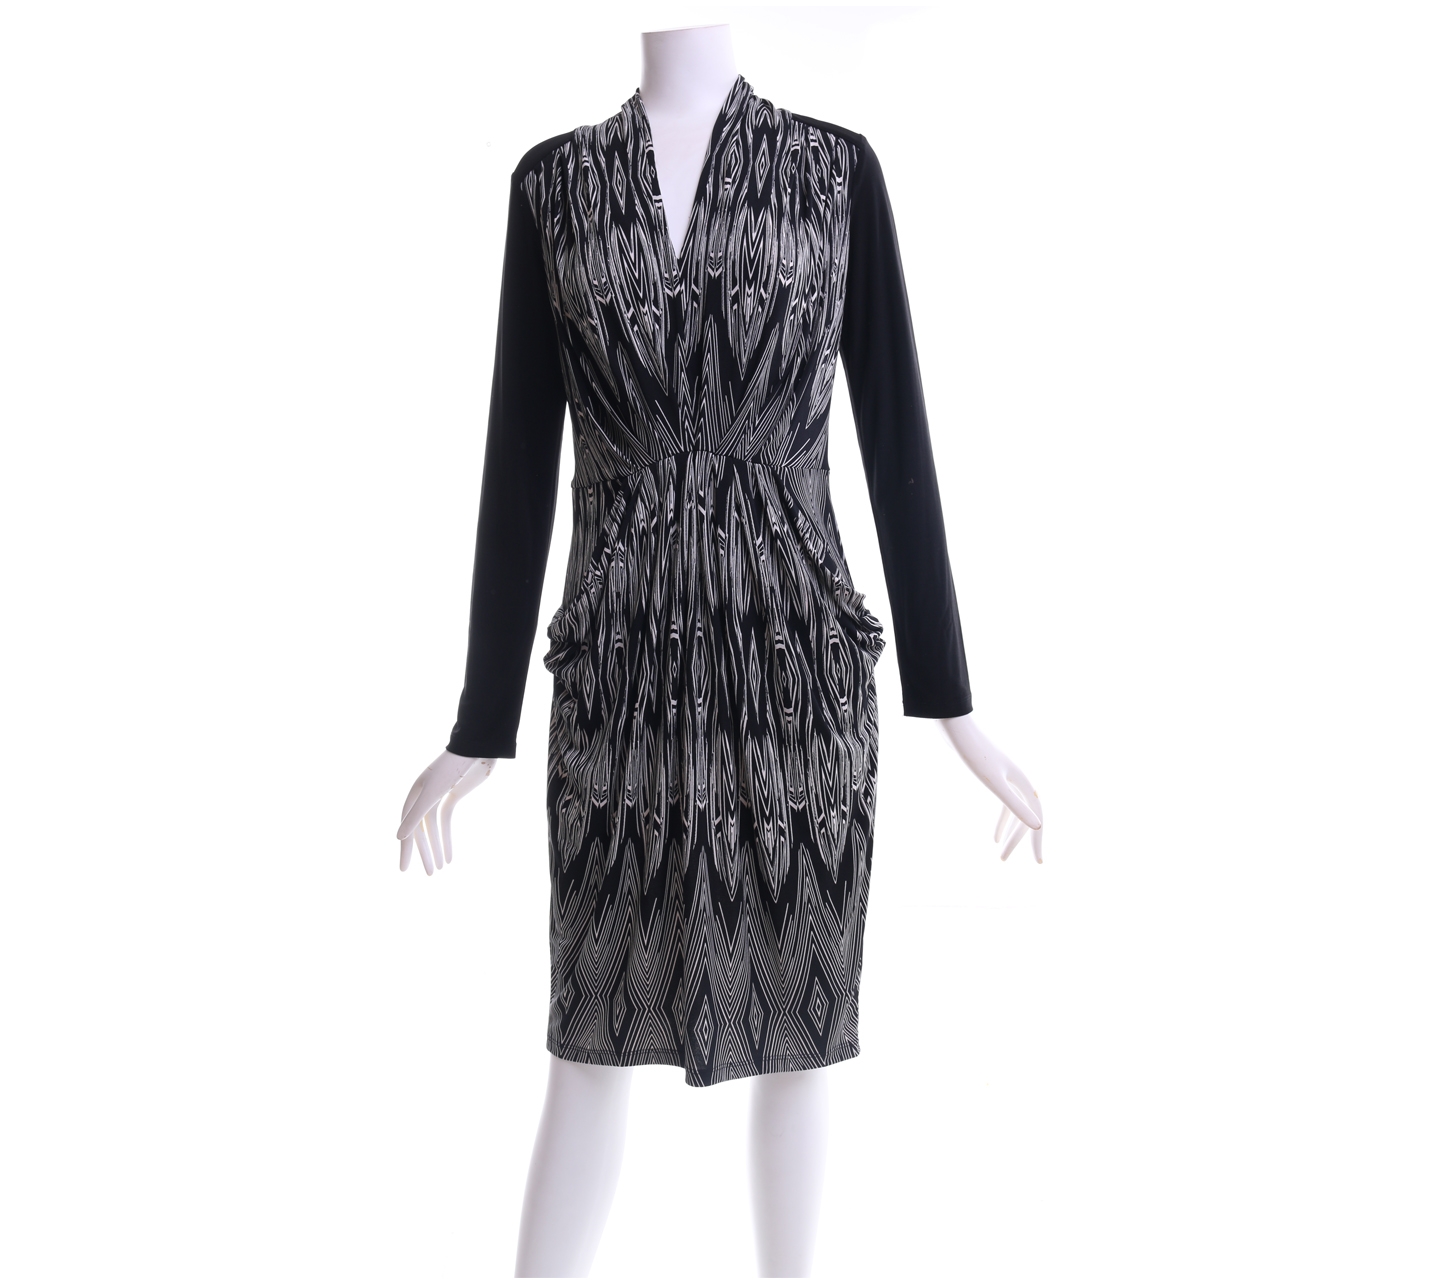 Butterfly By Matthew Williamson Black And White Patterned Midi Dress